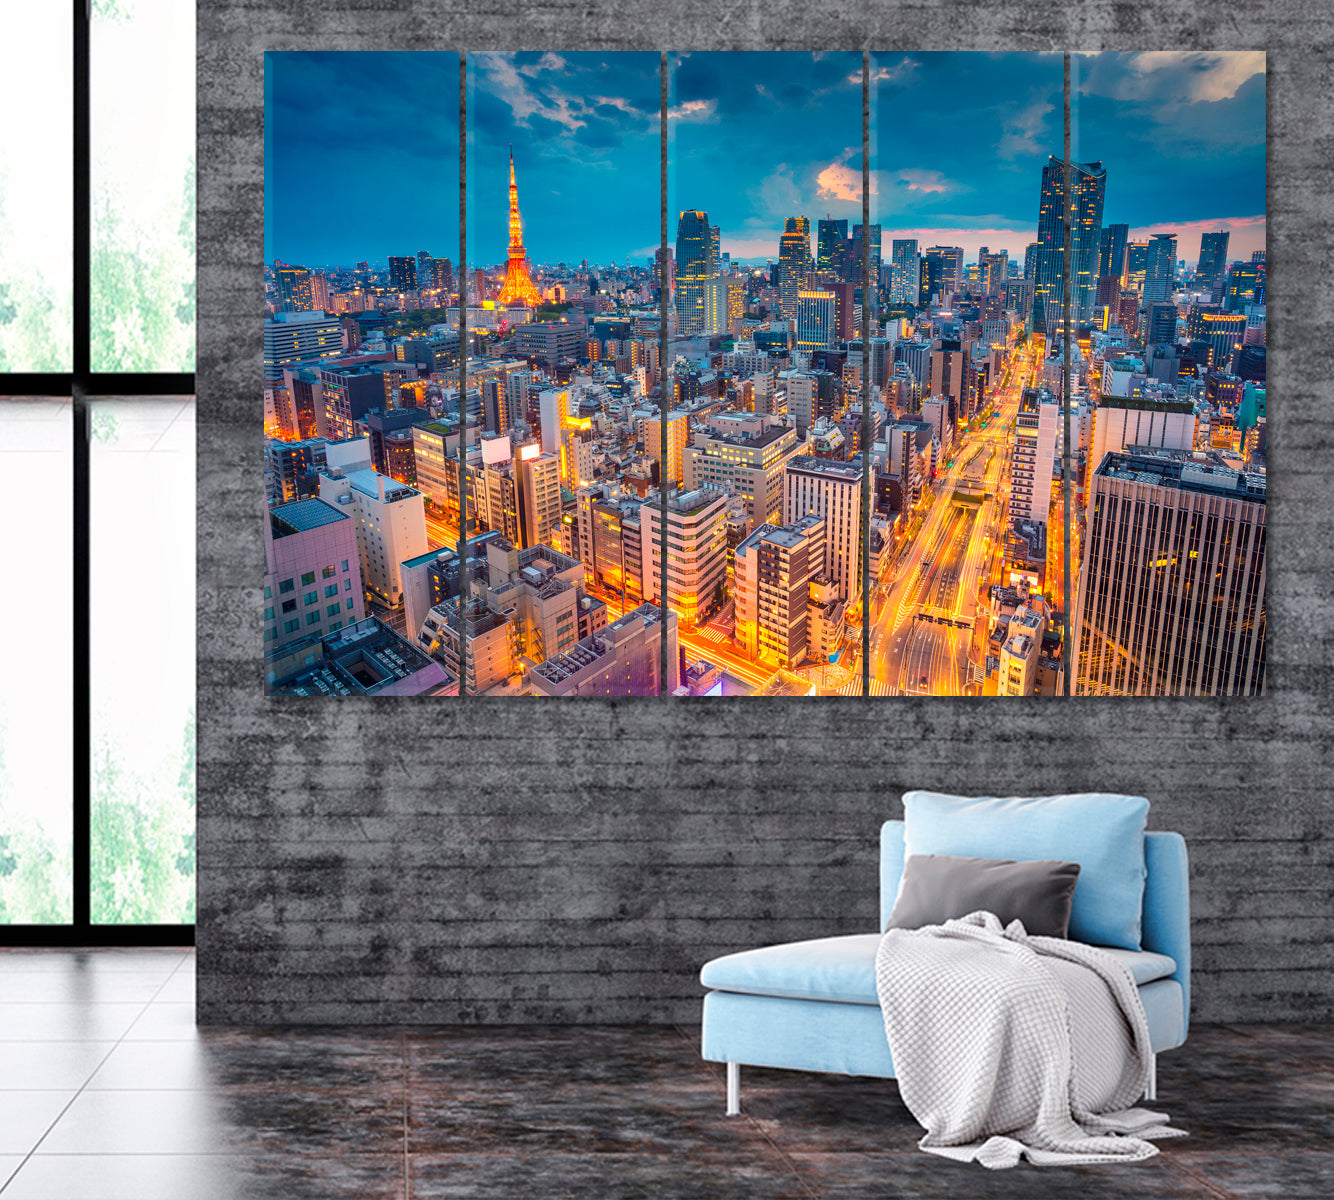 Tokyo Cityscape at Night Canvas Print ArtLexy 5 Panels 36"x24" inches 